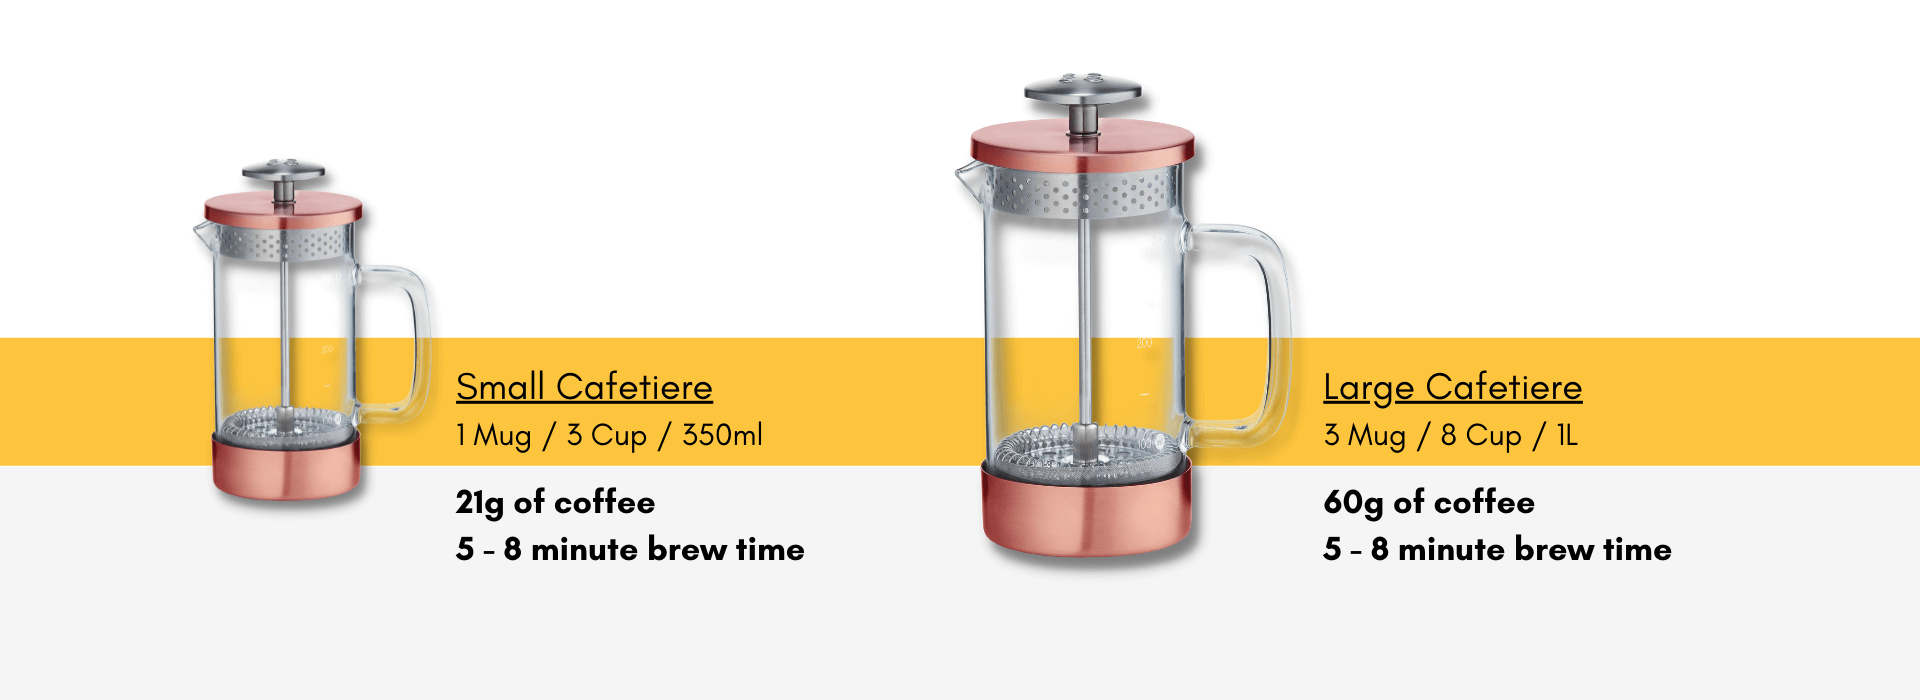 21g of coffee in 3 cup cafetiere and 60g of coffee in 8 cup cafetiere